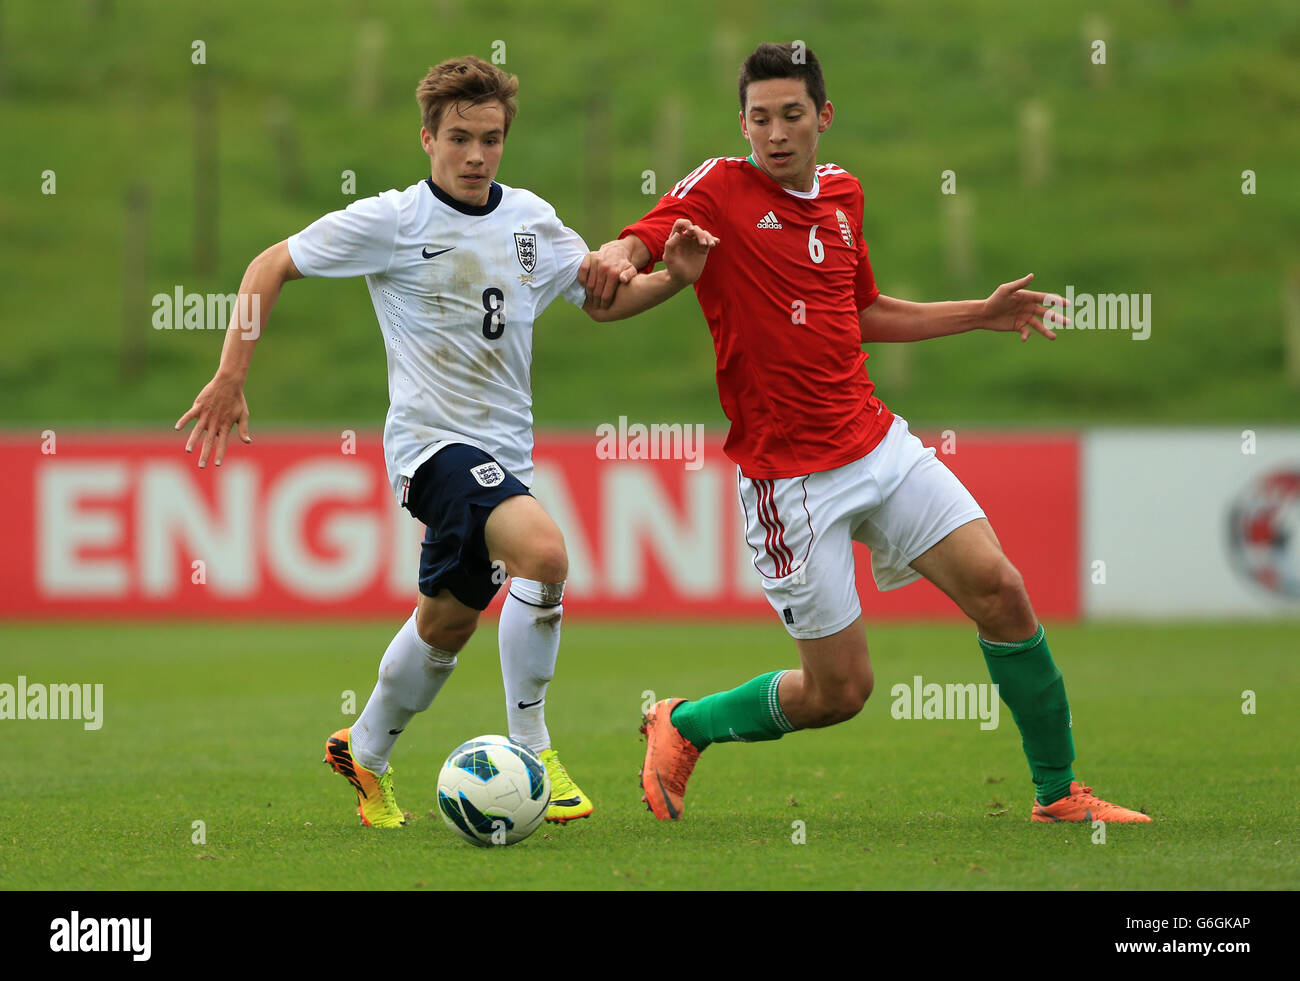 Soccer - Under 18's International - England v Hungary - St George's Park. England's Will Miller and Hungary's Vida Mate Stock Photo